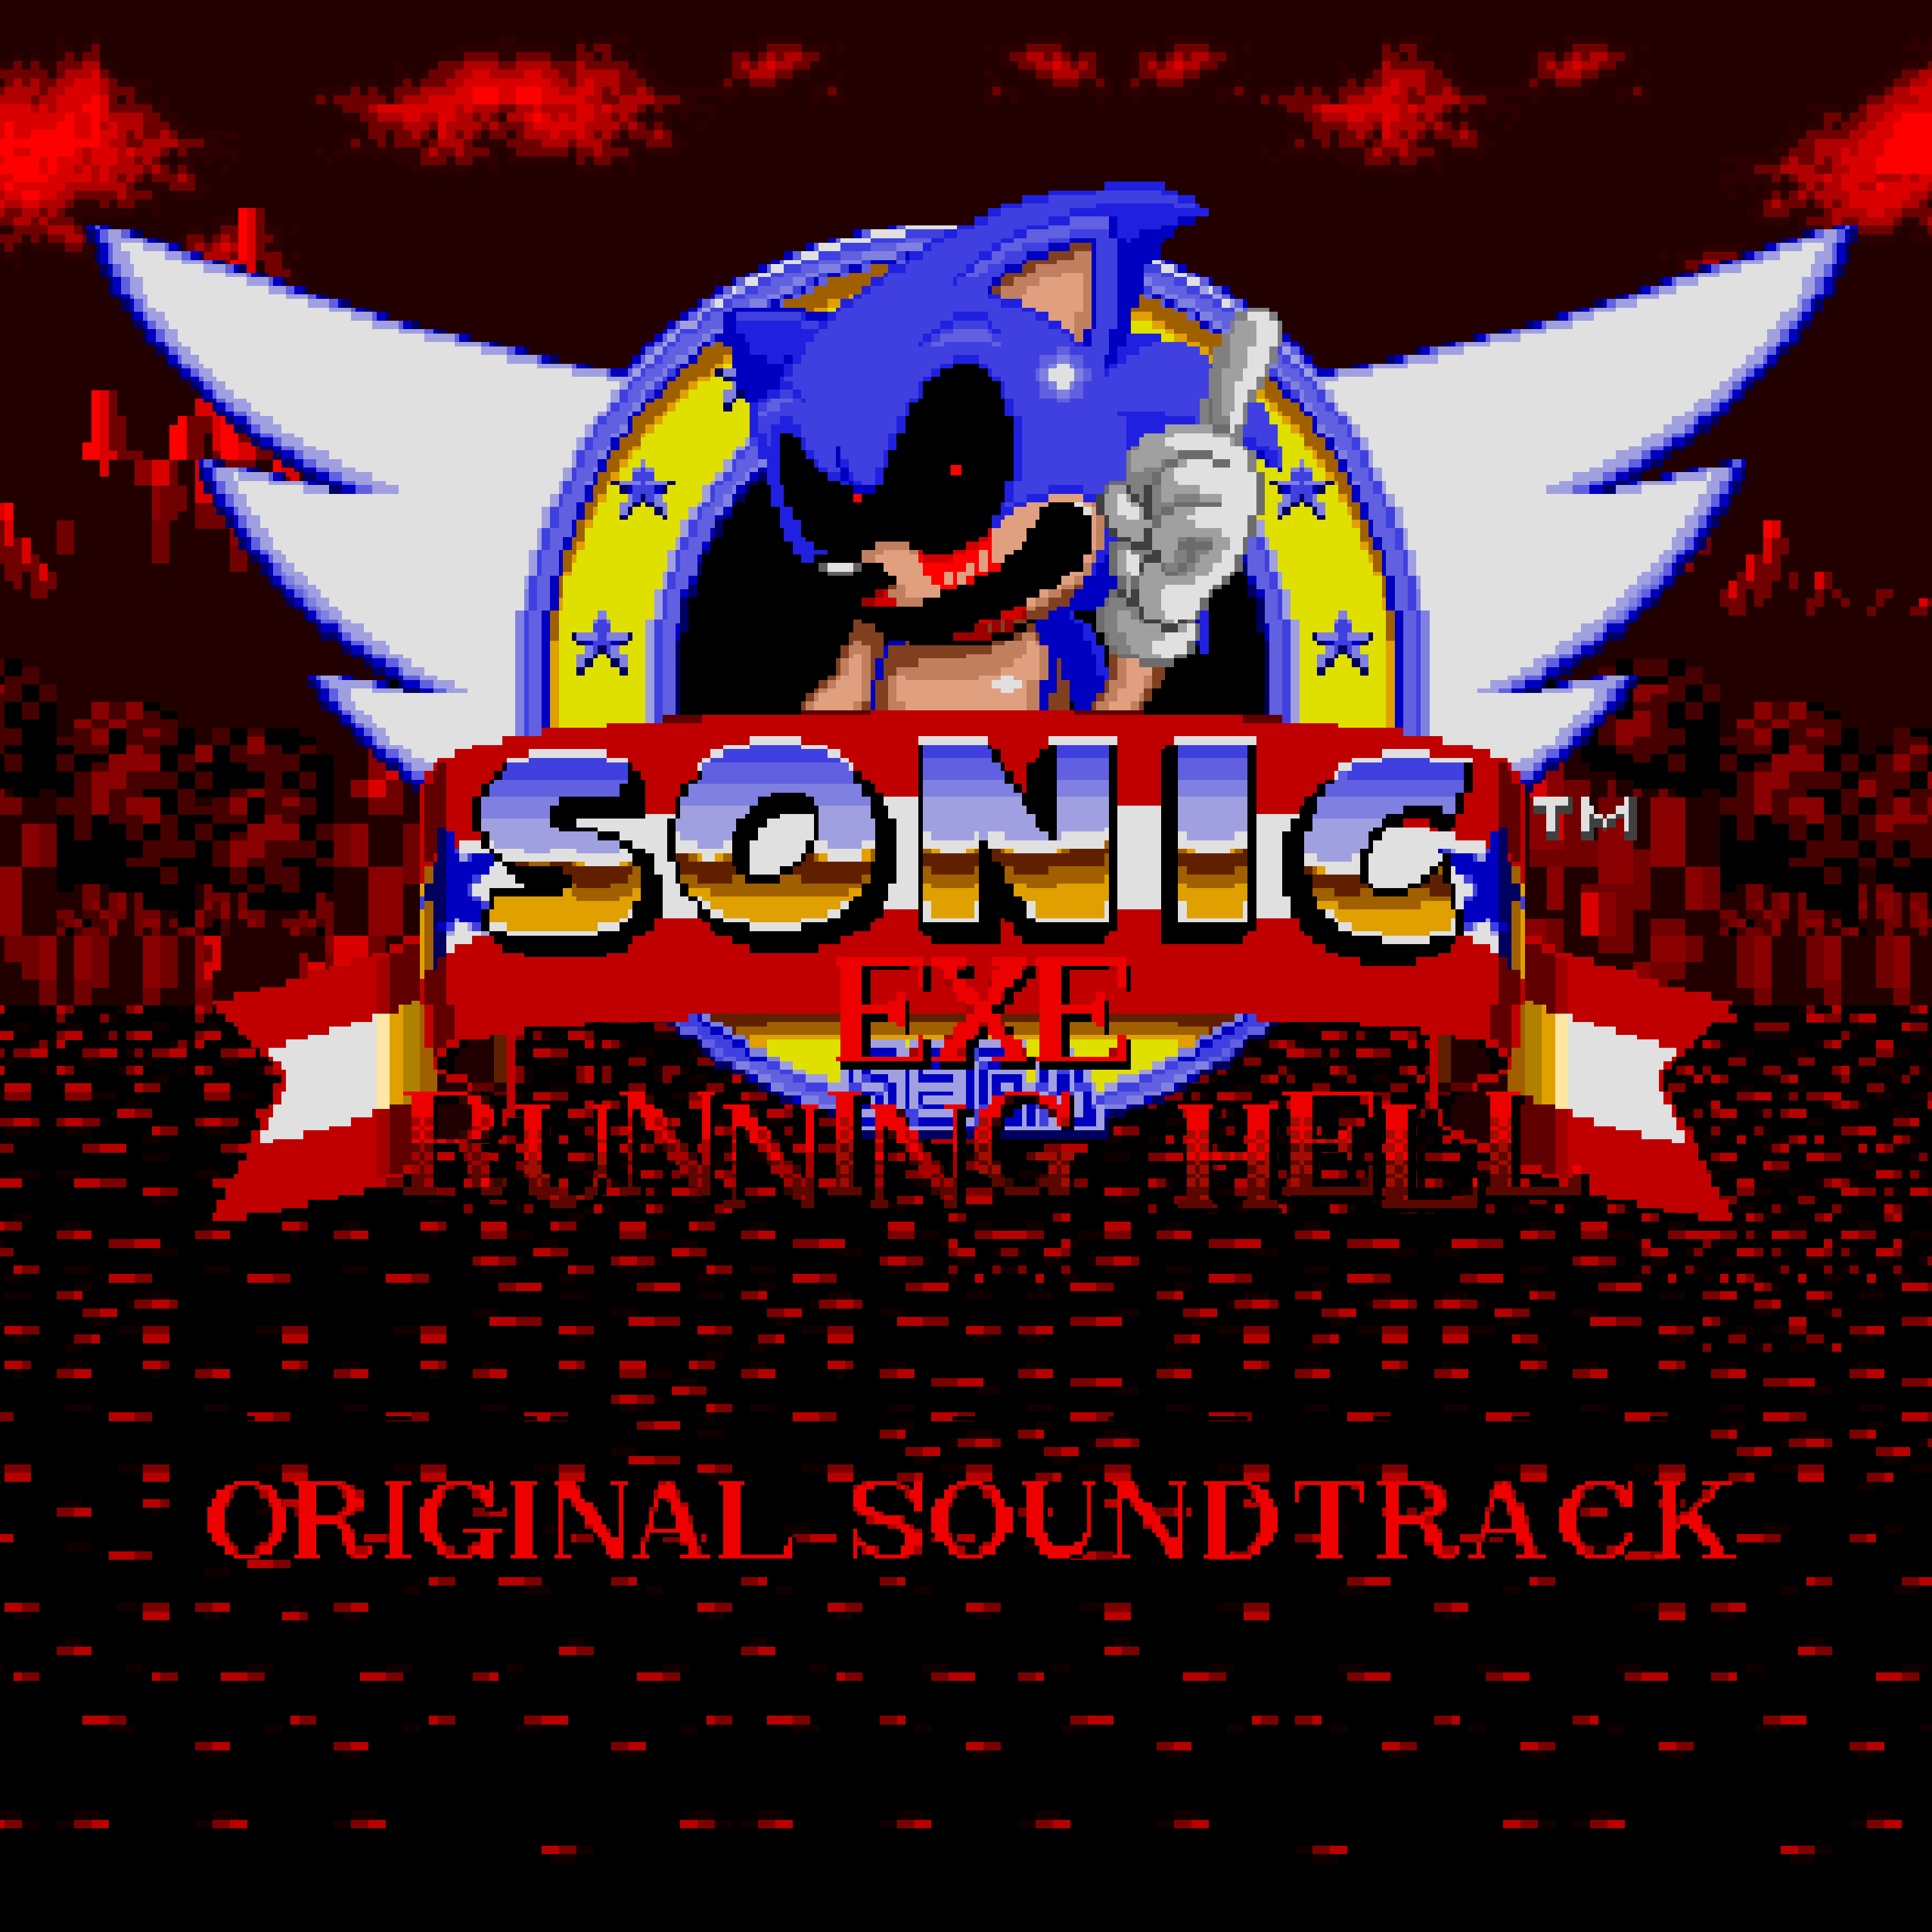 Stream Fnf sonic exe 2.0 ost by Alexblank 2